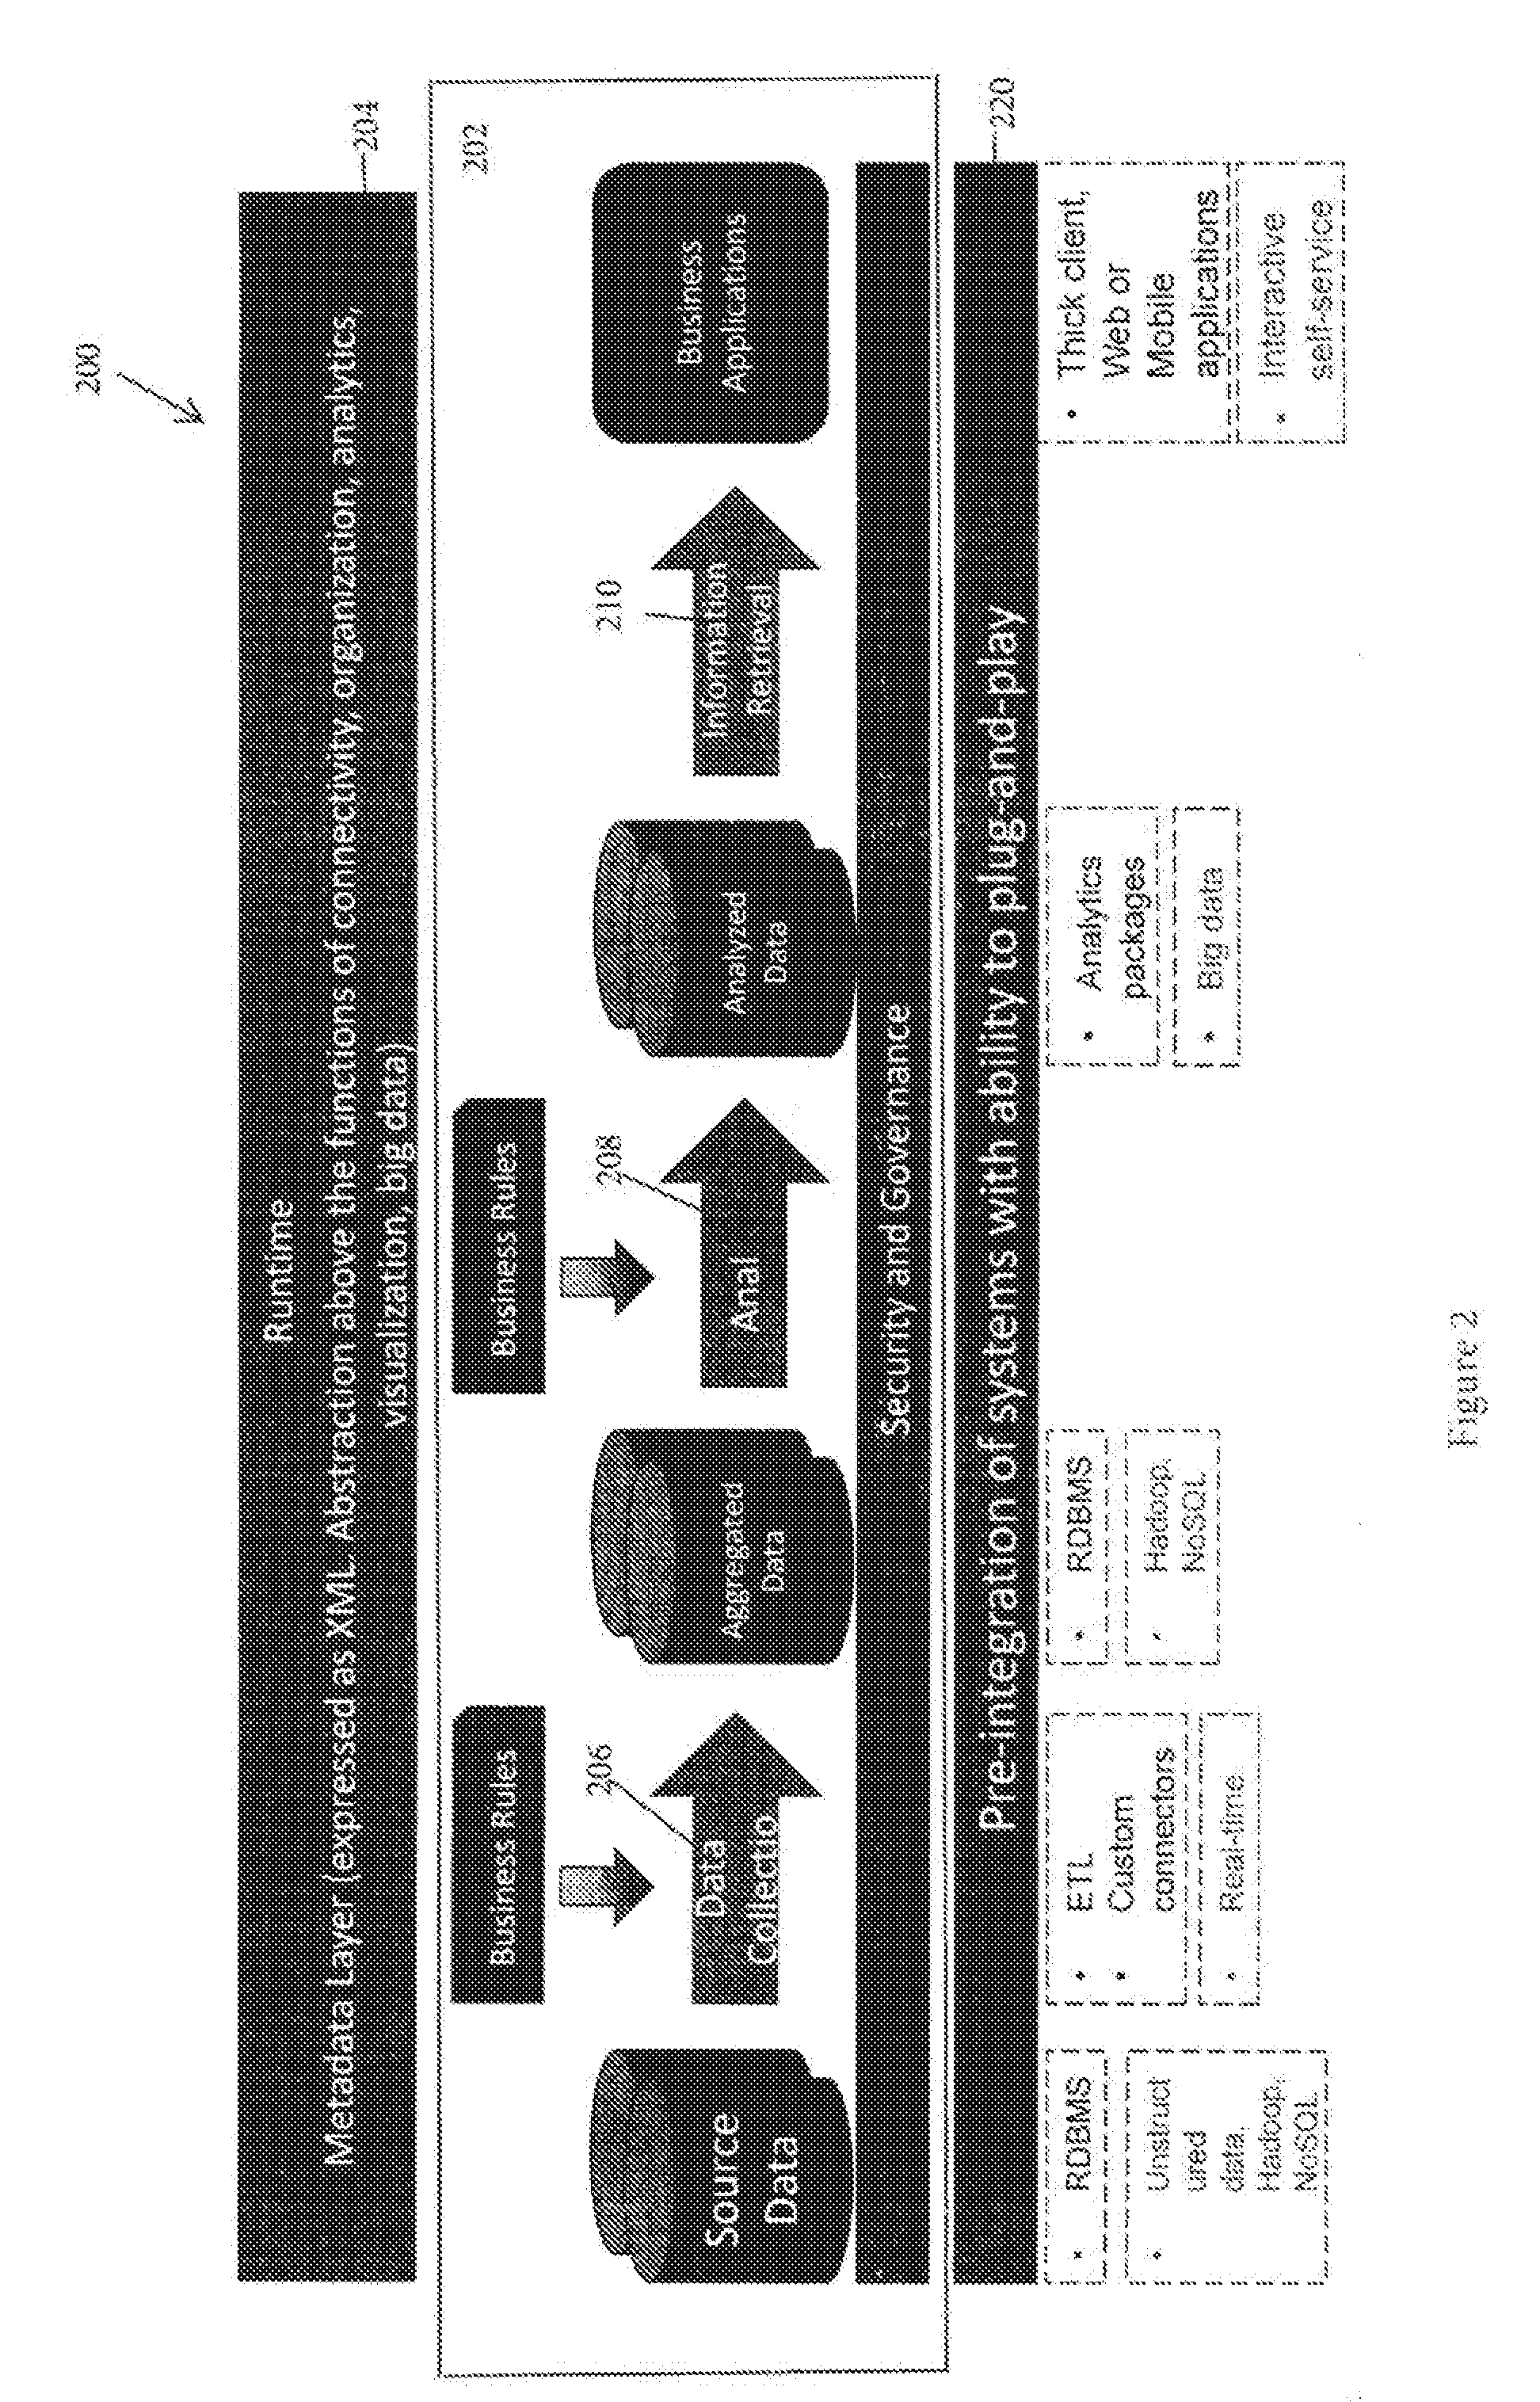 Methods and apparatus for analysis of employee engagement and contribution in an organization